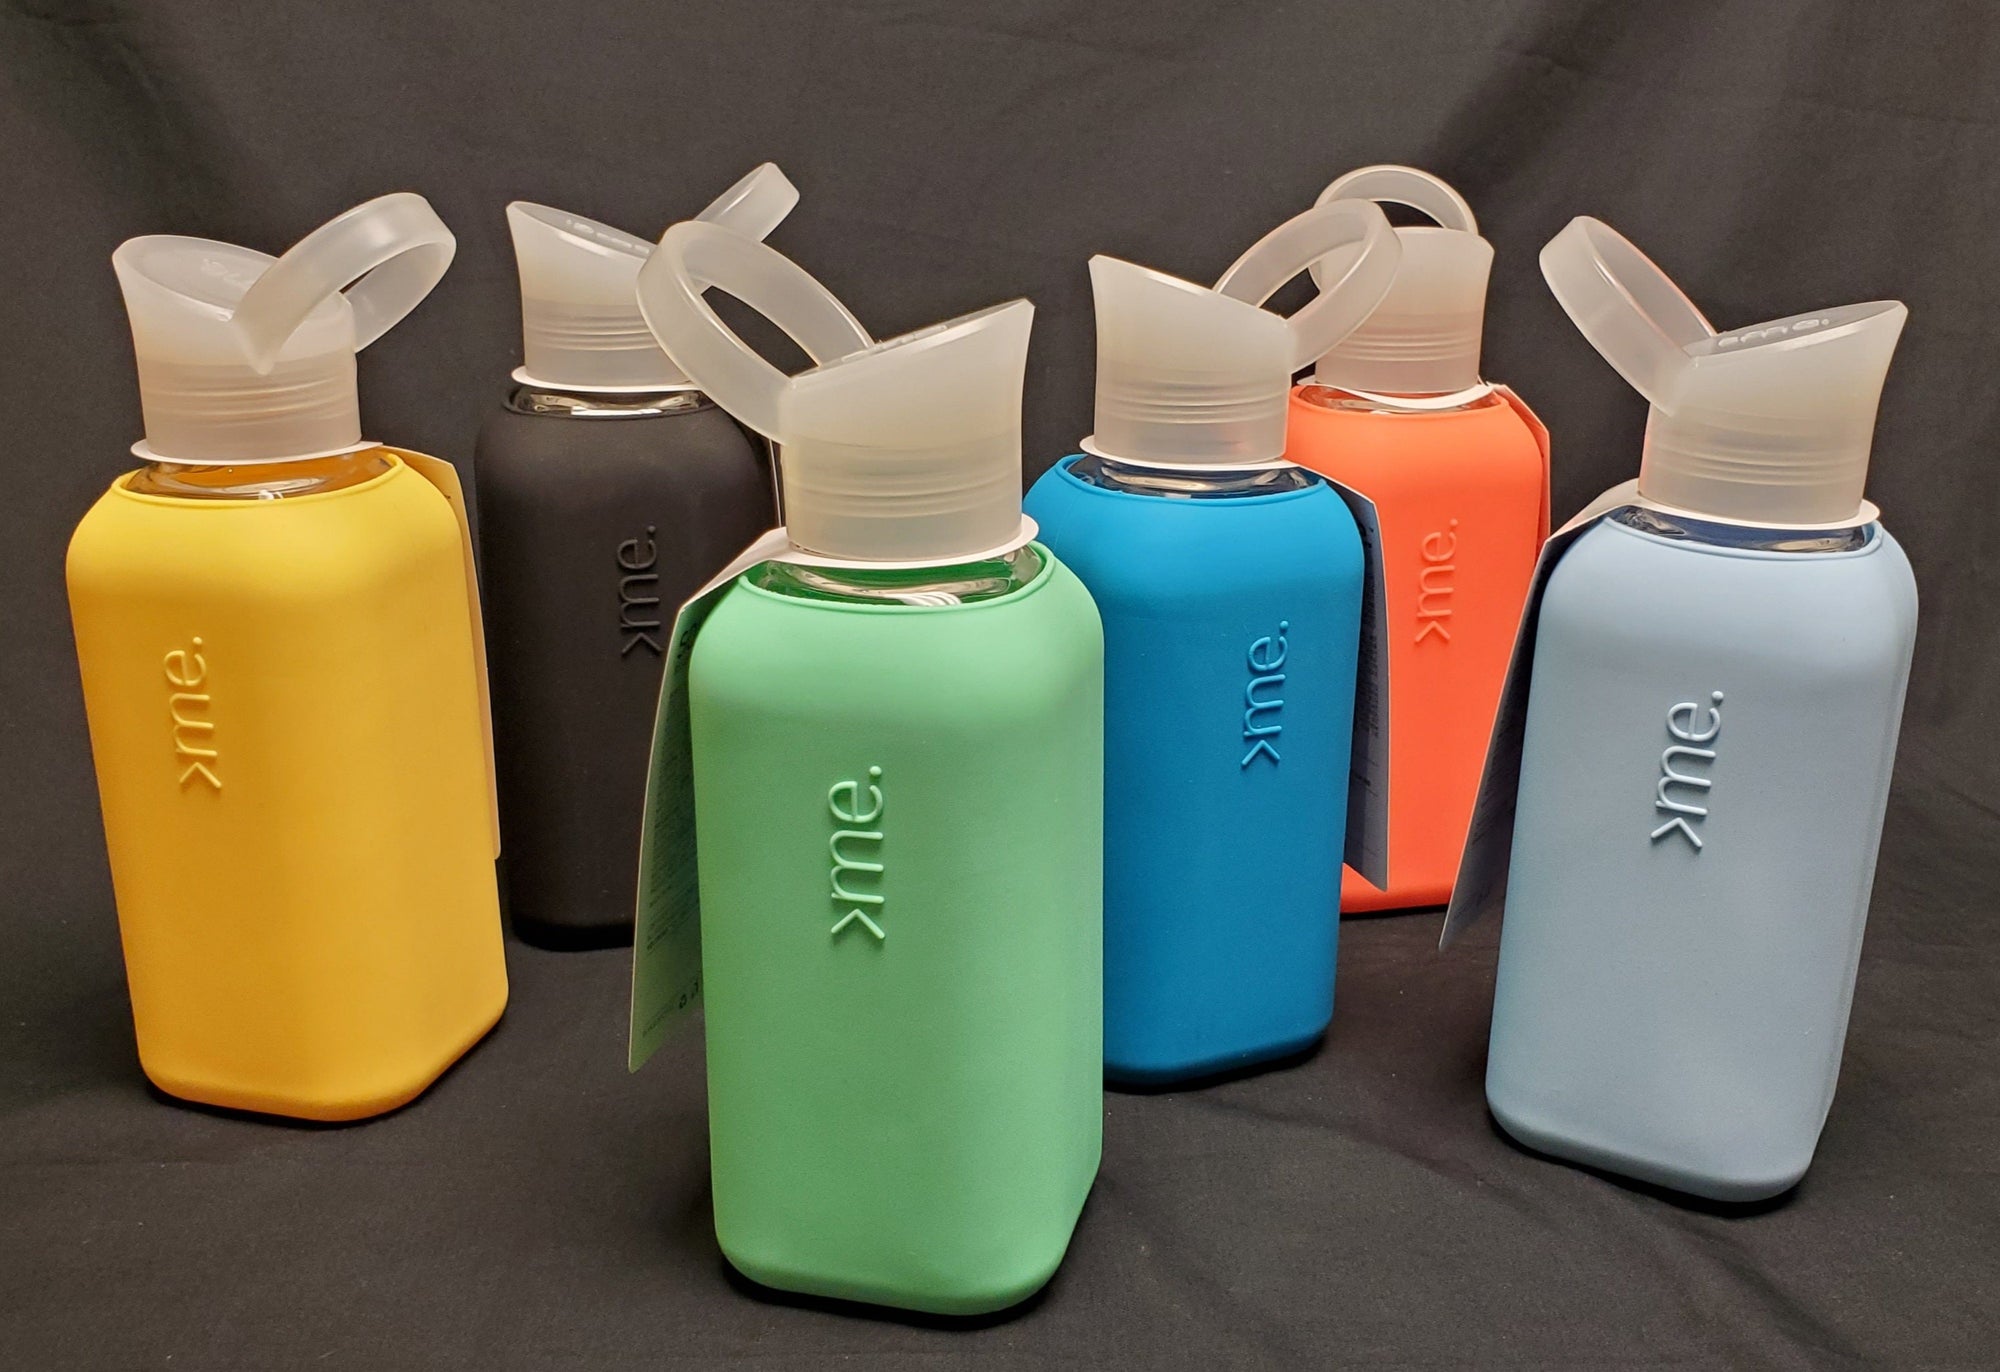 Squireme Glass Bottles with Silicone Sleeve - Found